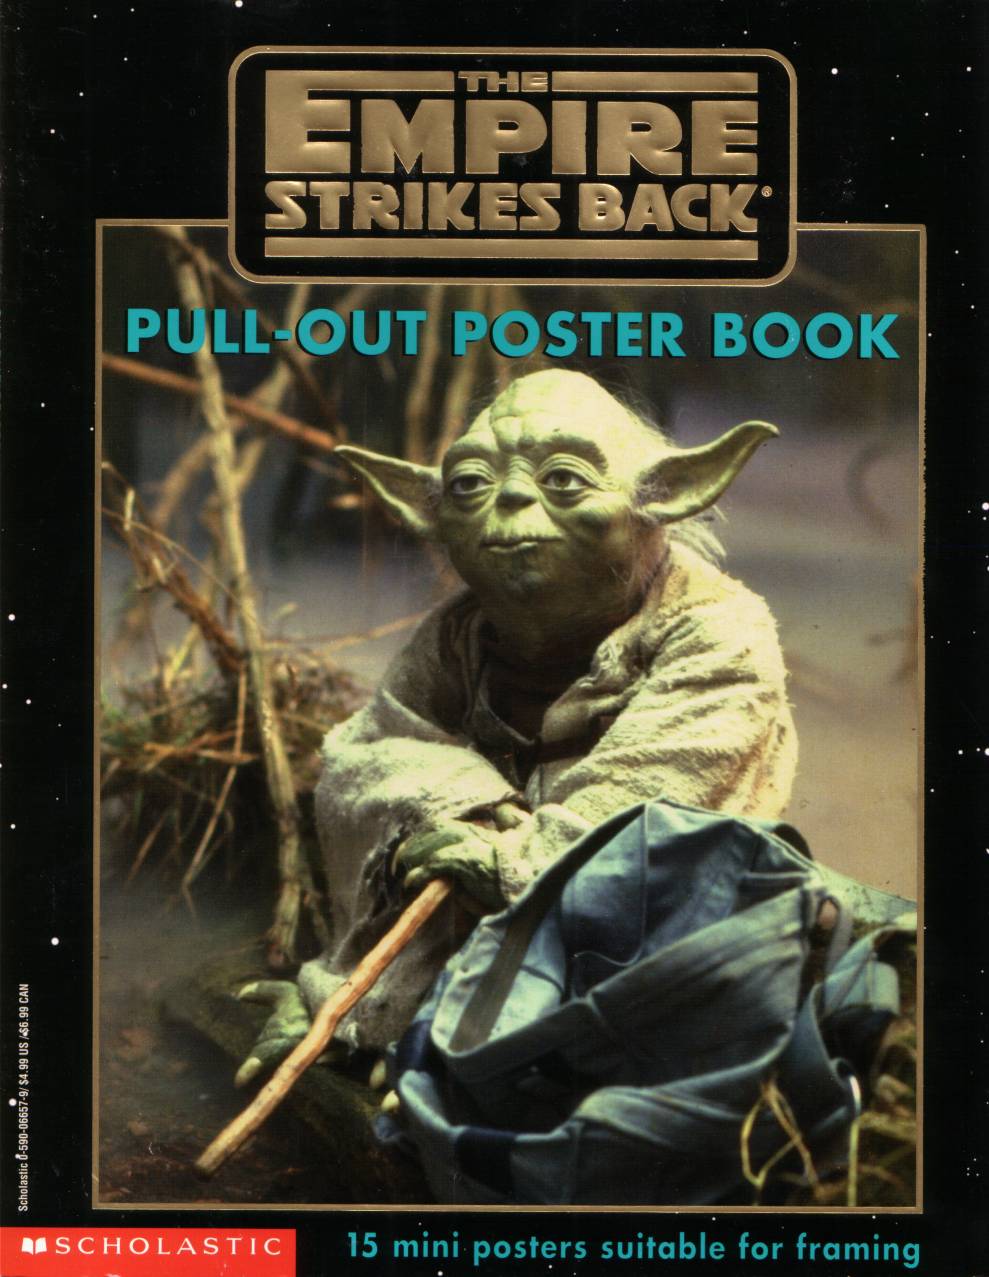 Empire Strikes Back Pull-Out Poster book